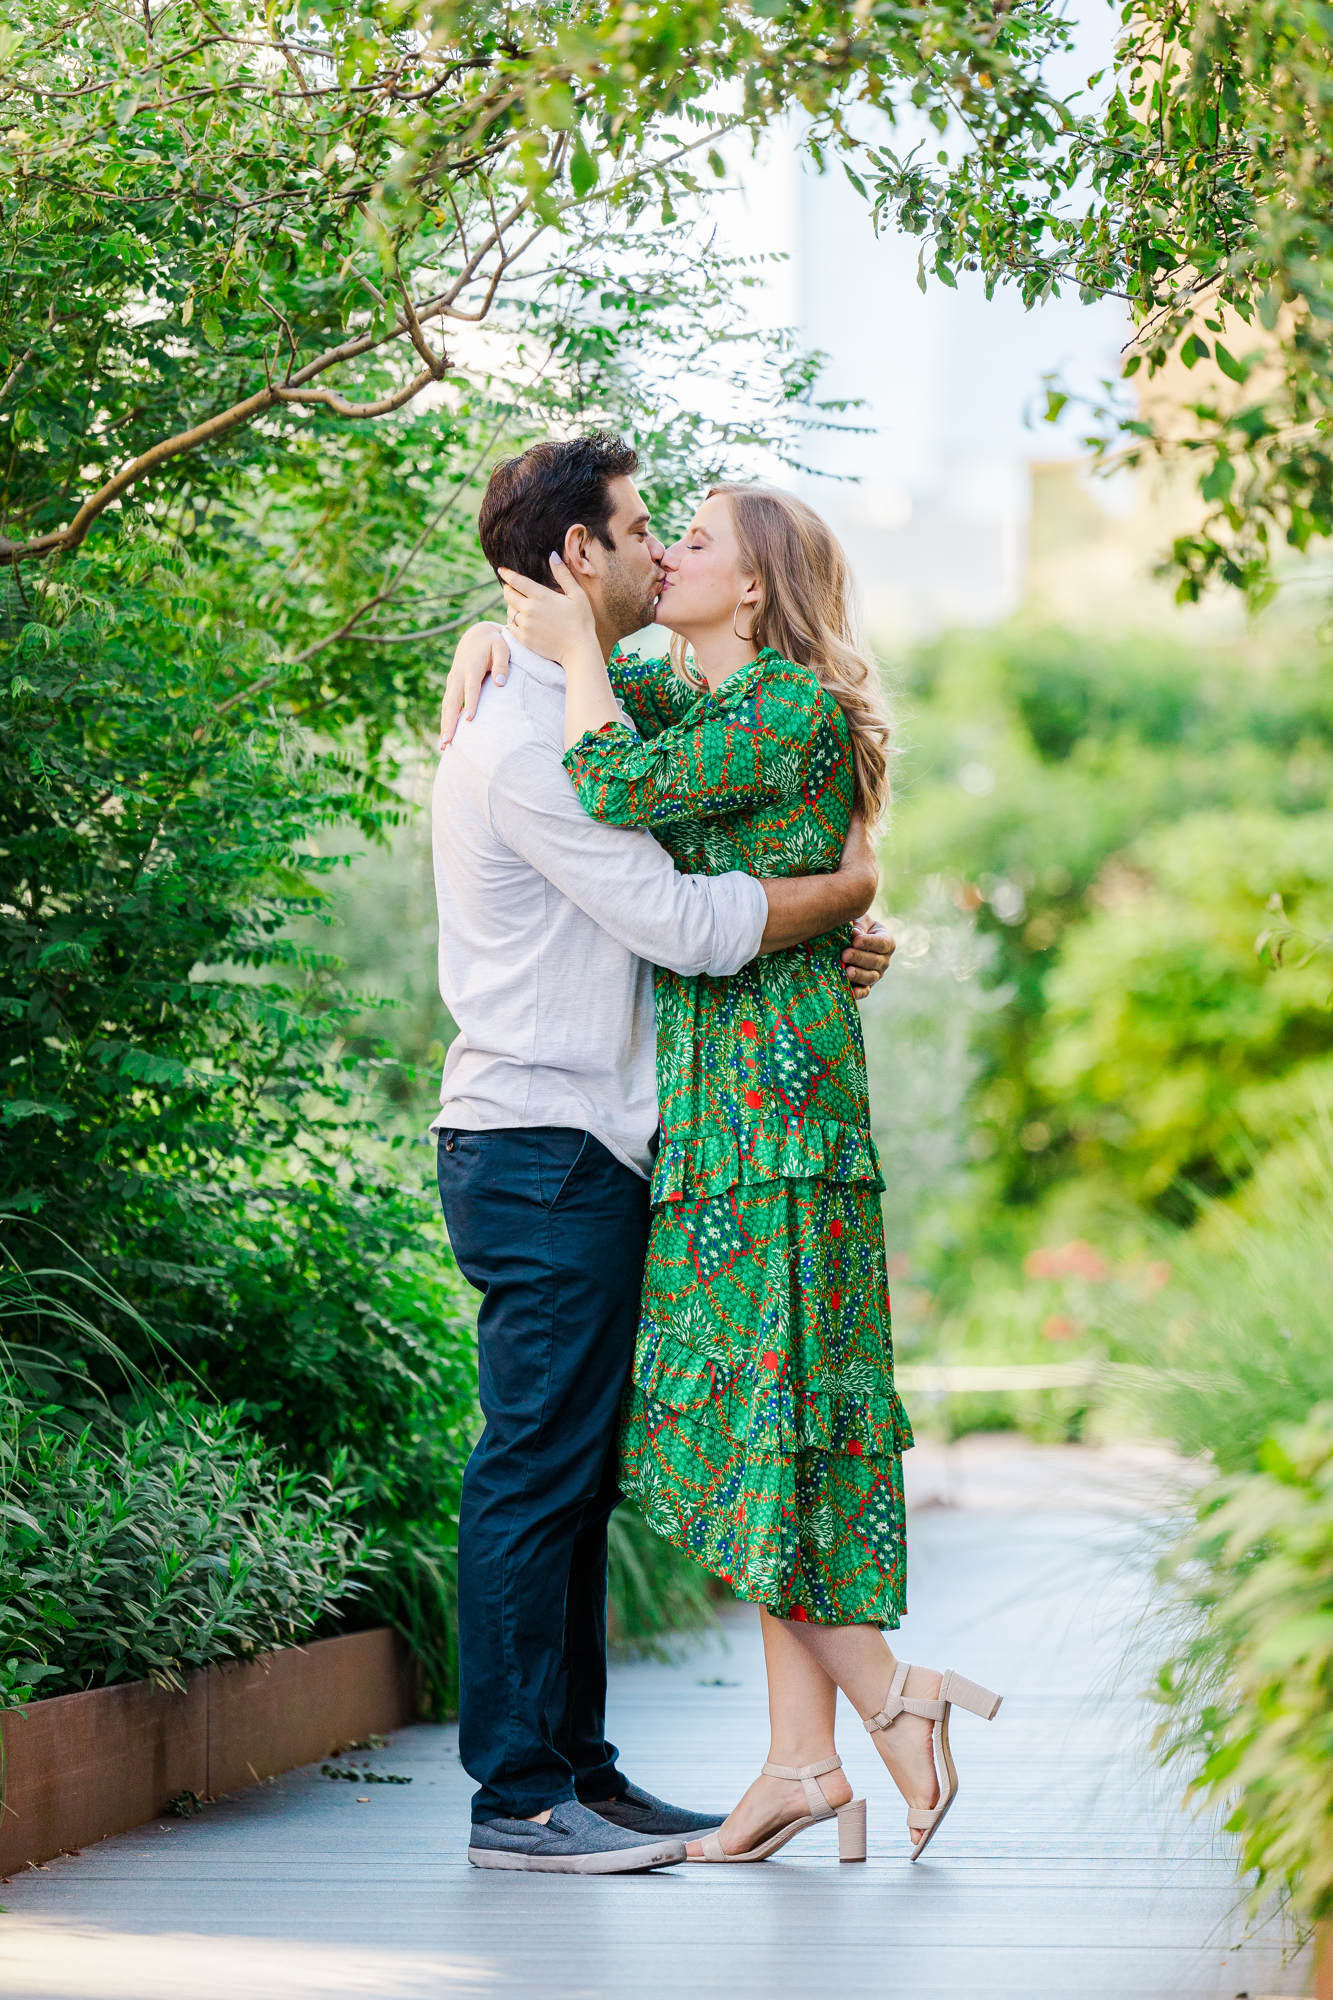 Beautiful Summer High Line Engagement Photography in the West Village